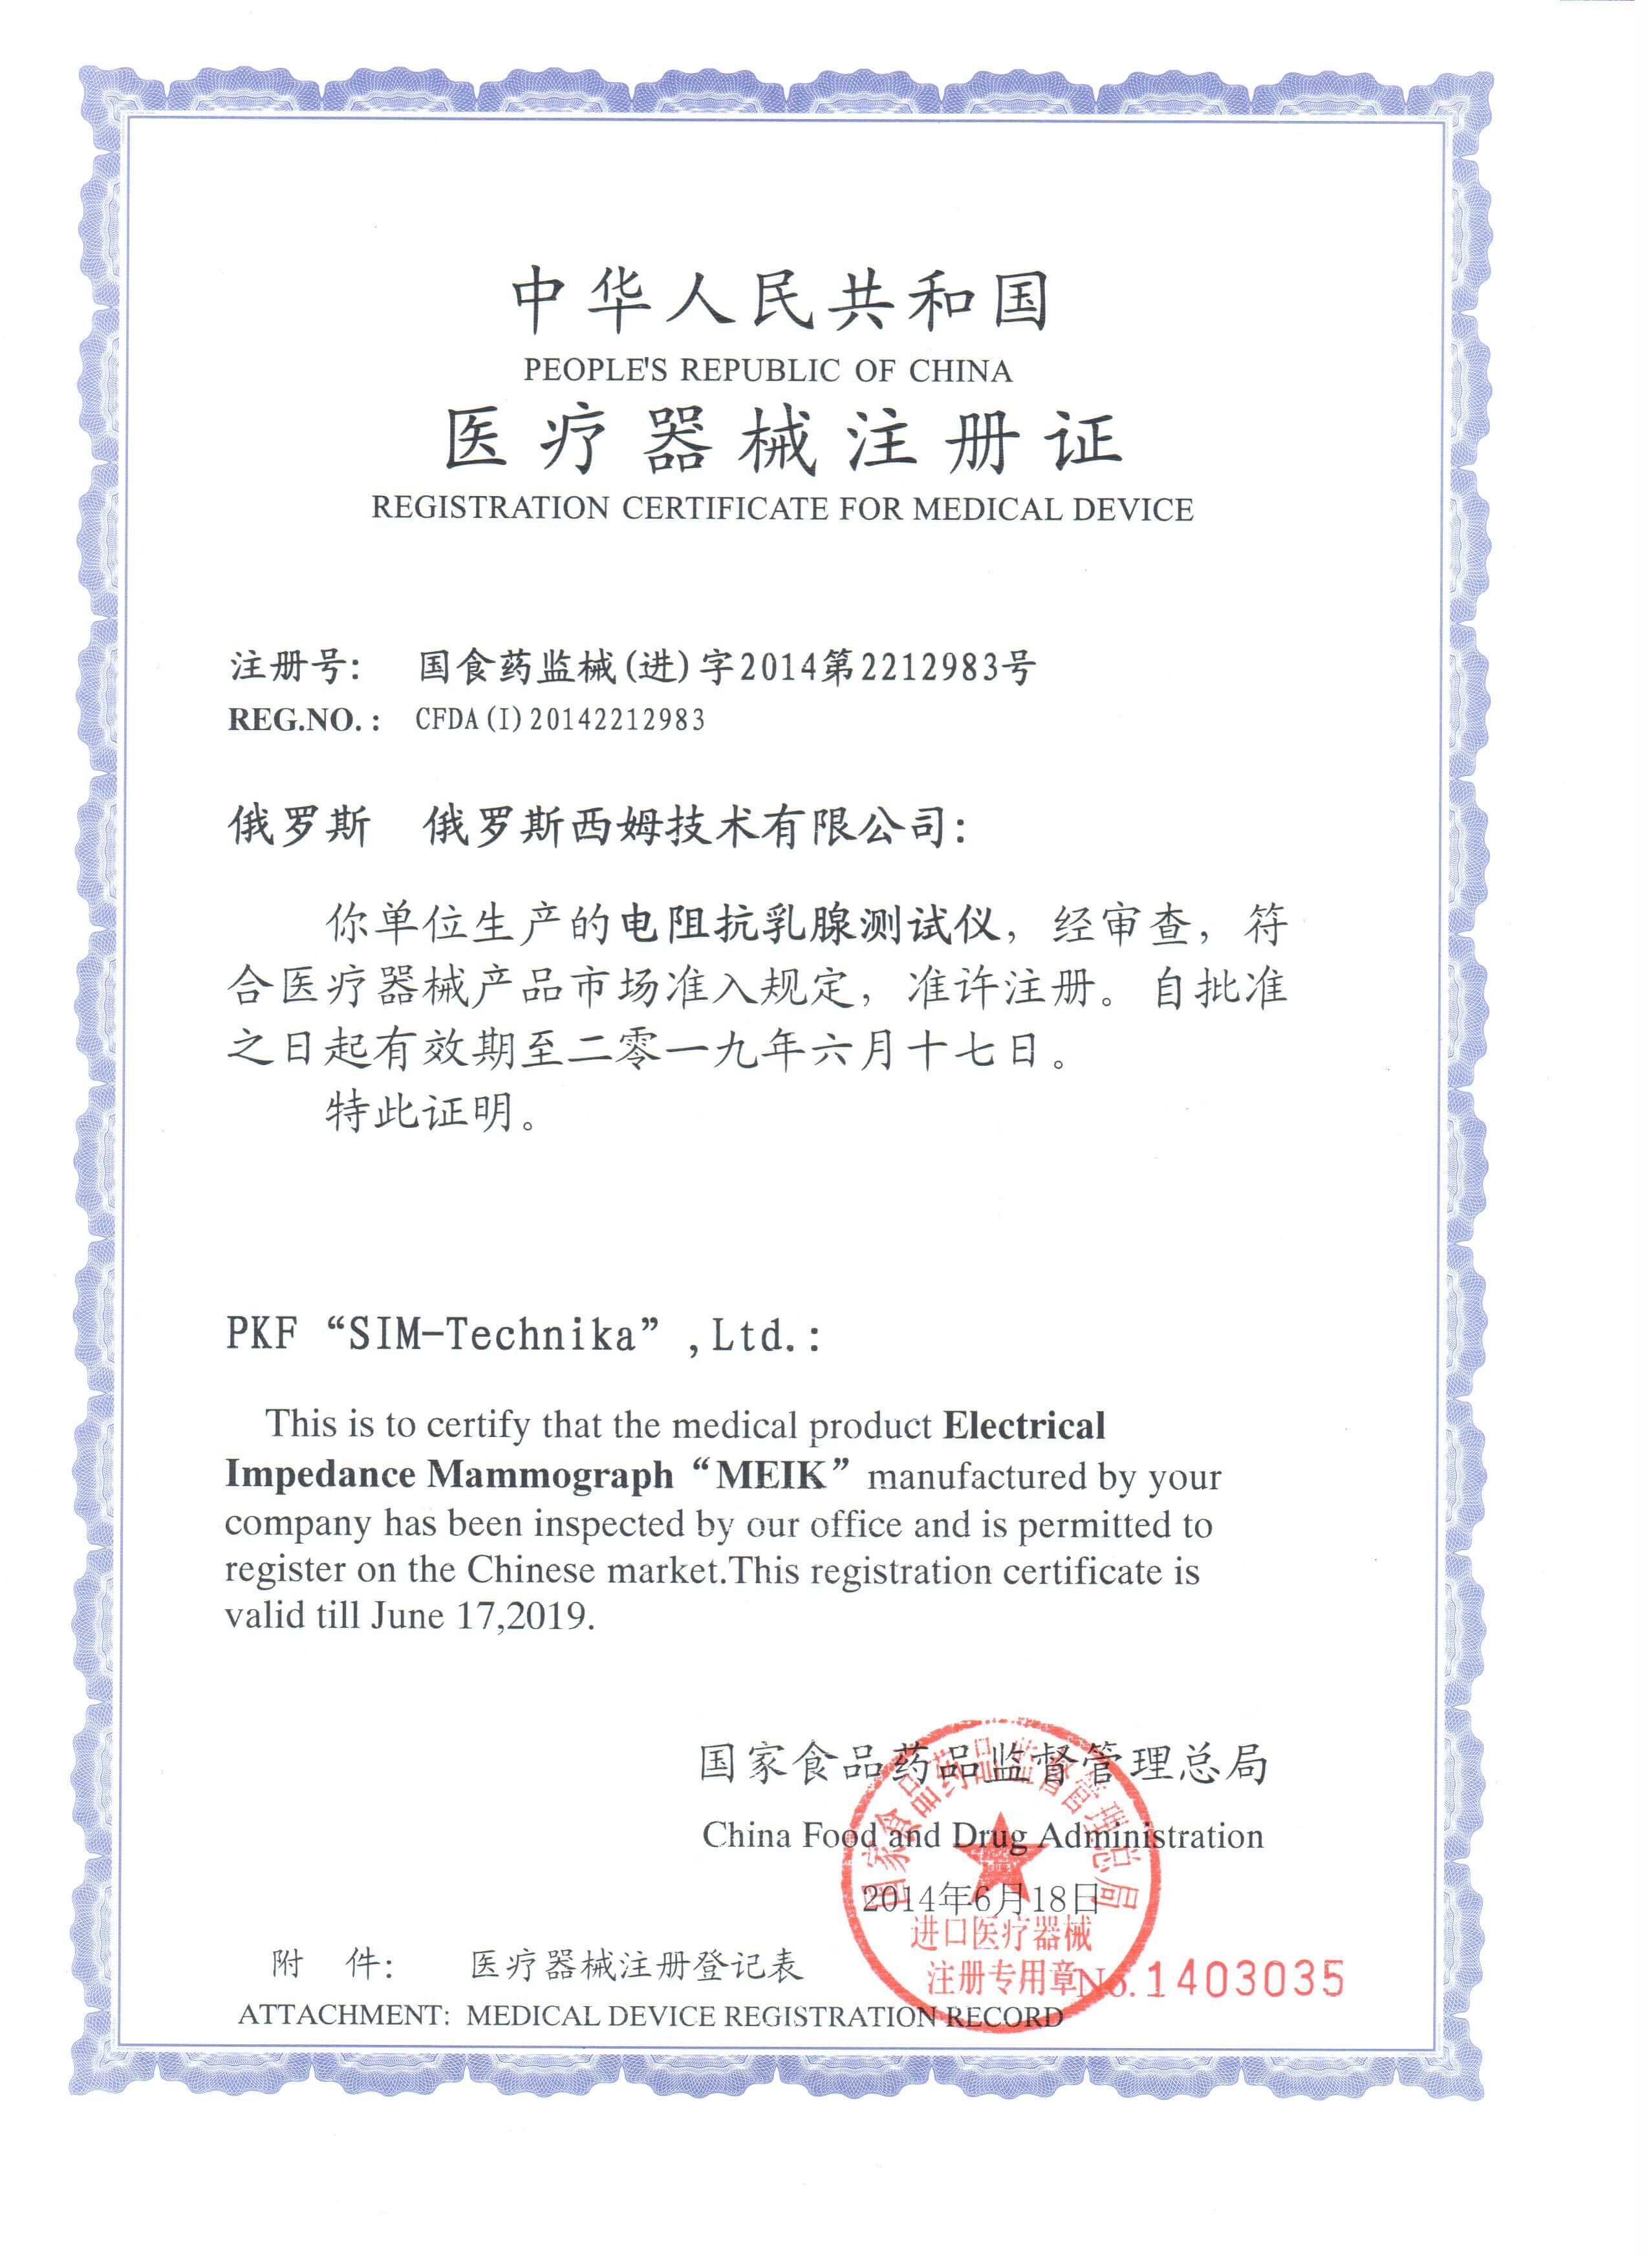 China MEIK electroimpedance electric impedance mammography harmless brest screening certificate